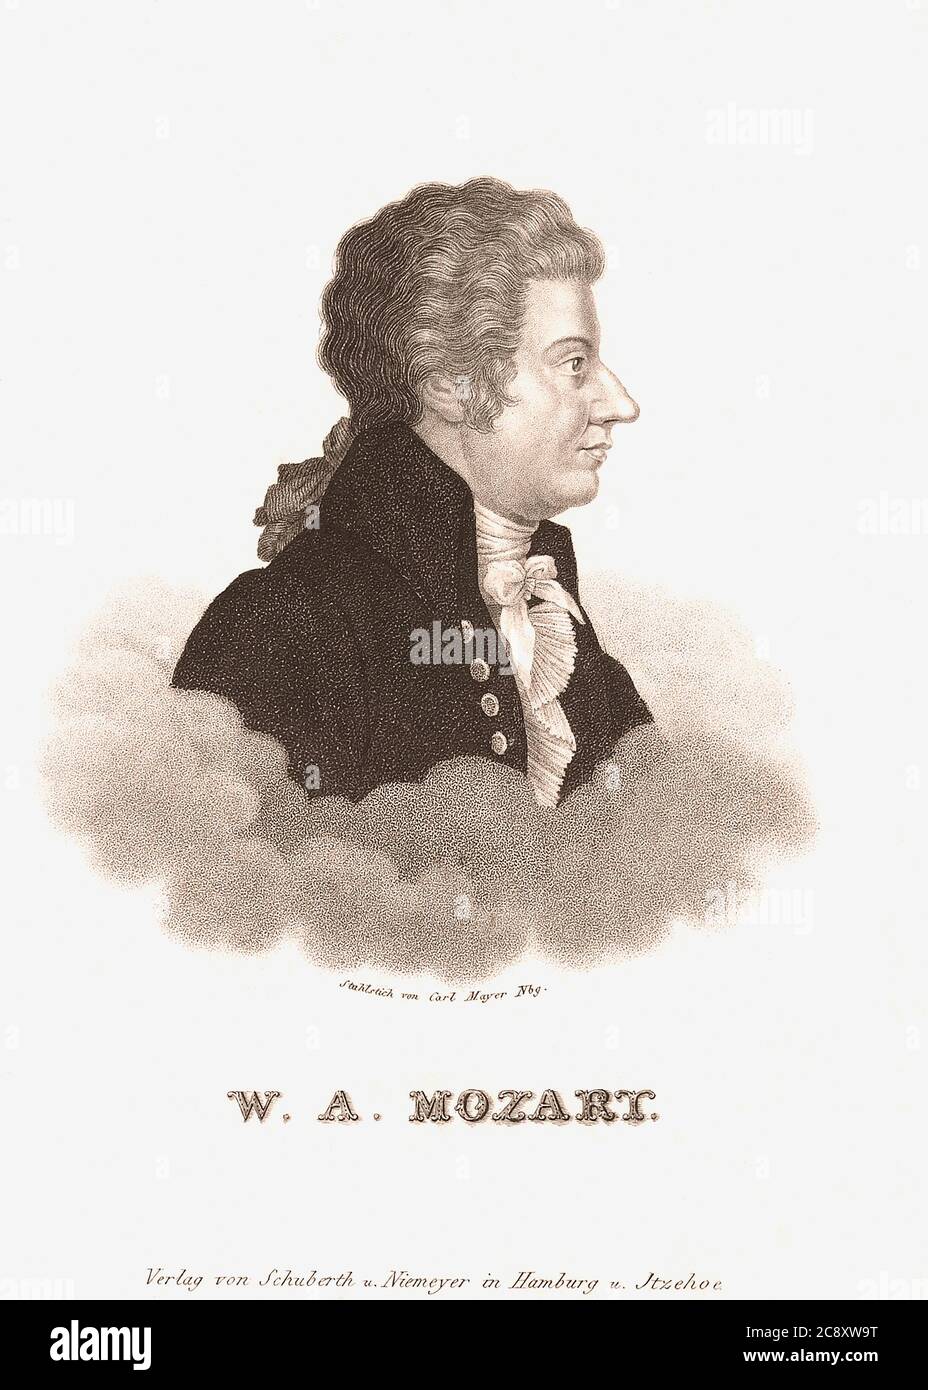 Wolfgang Amadeus Mozart, 1756 – 1791, baptised as Johannes Chrysostomus Wolfgangus Theophilus Mozart. Prolific and influential composer of the classical era.  After a 19th century engraving by German artist Carl Mayer. Stock Photo